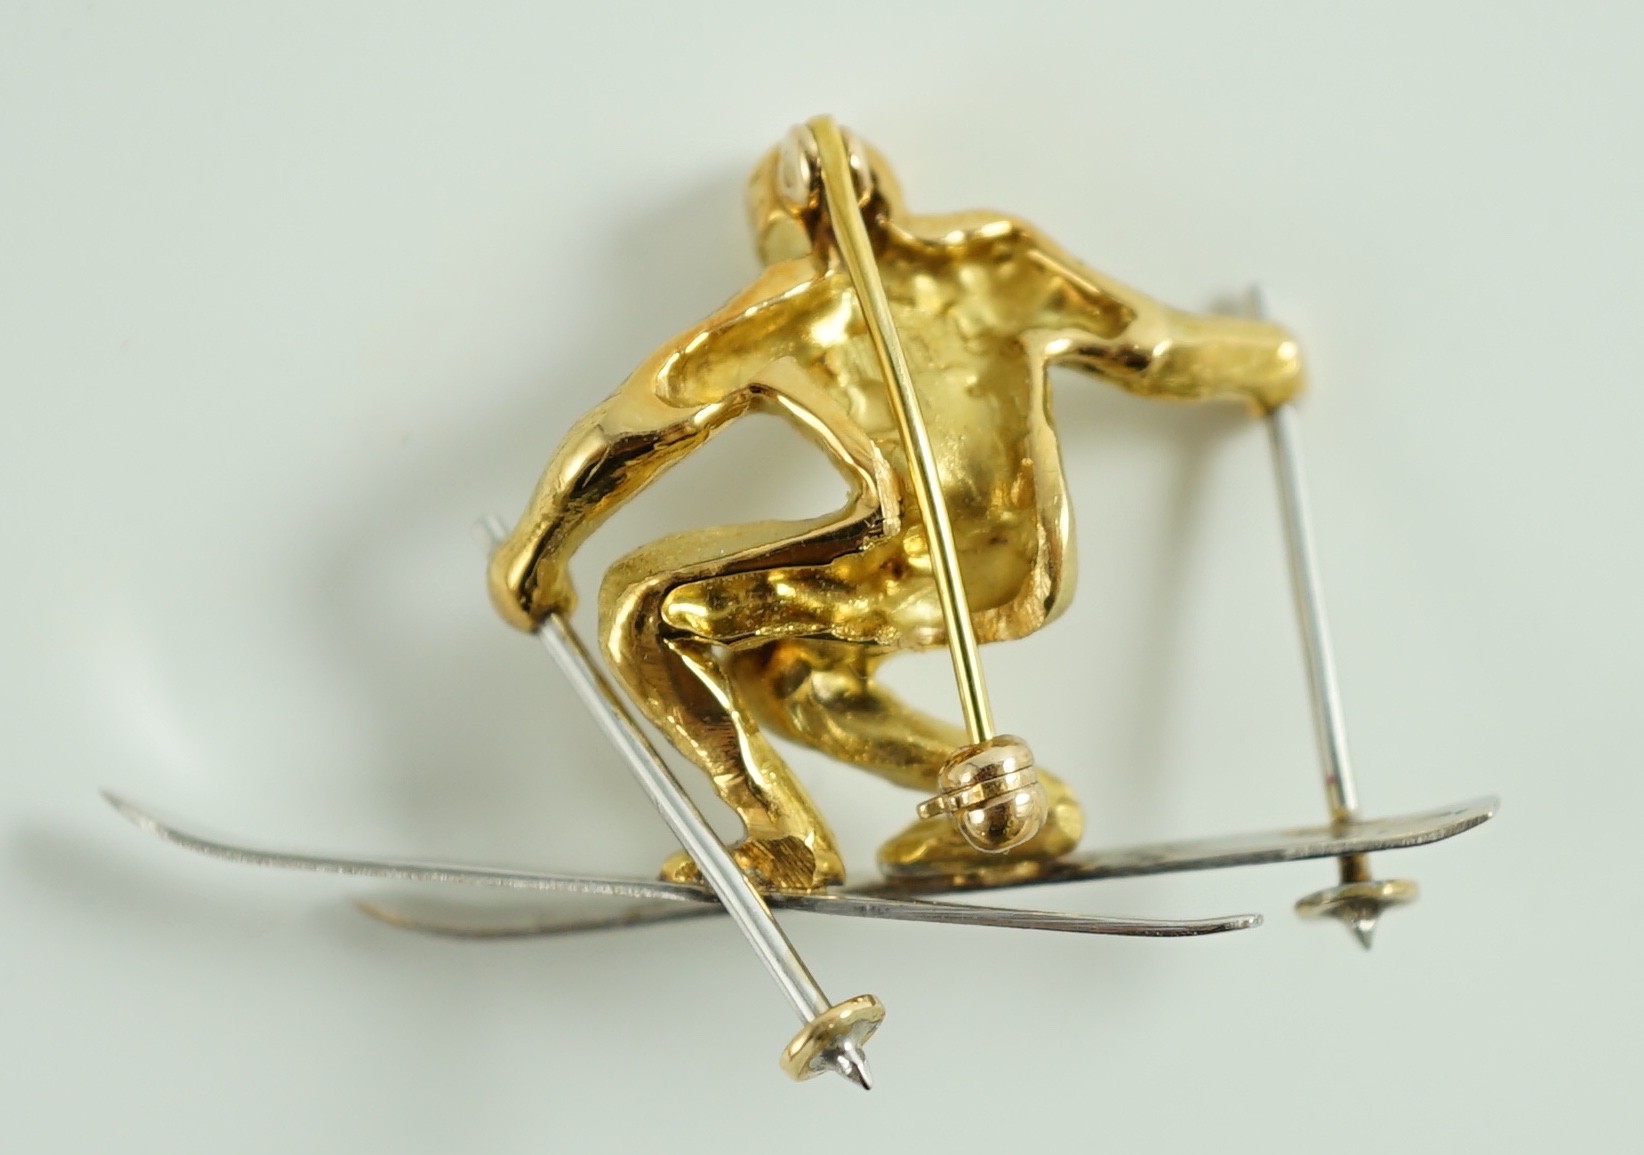 A gold and platinum novelty brooch modelled as a skier